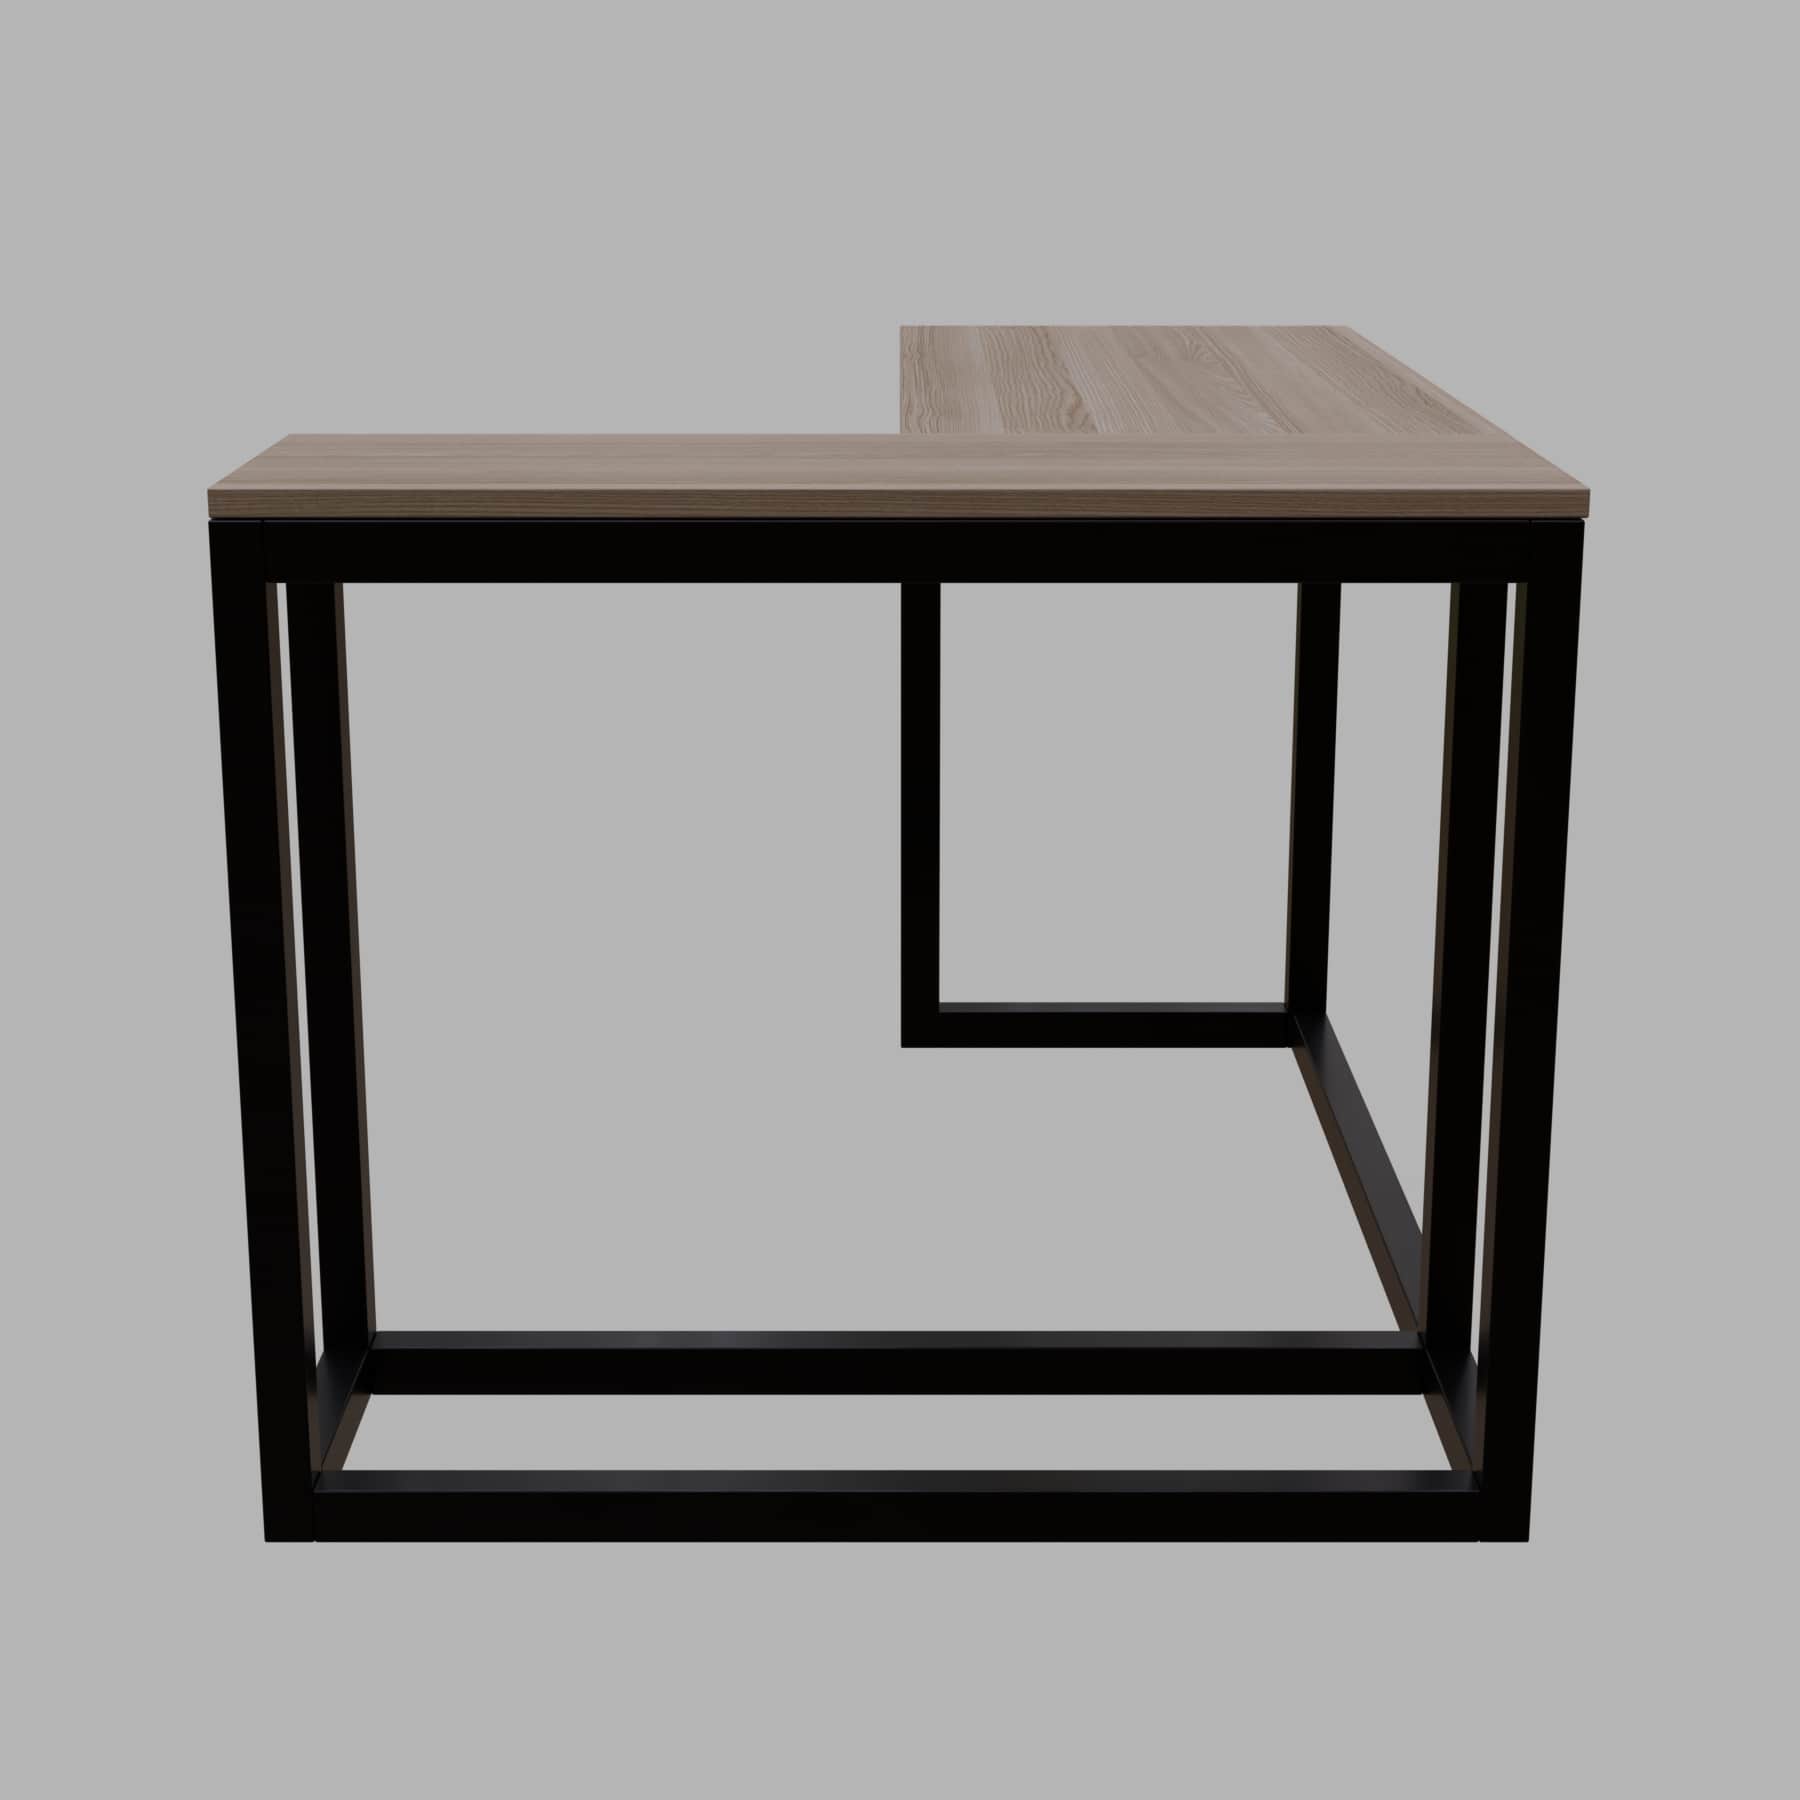 Teresa L Shaped Study Table in Wenge Color